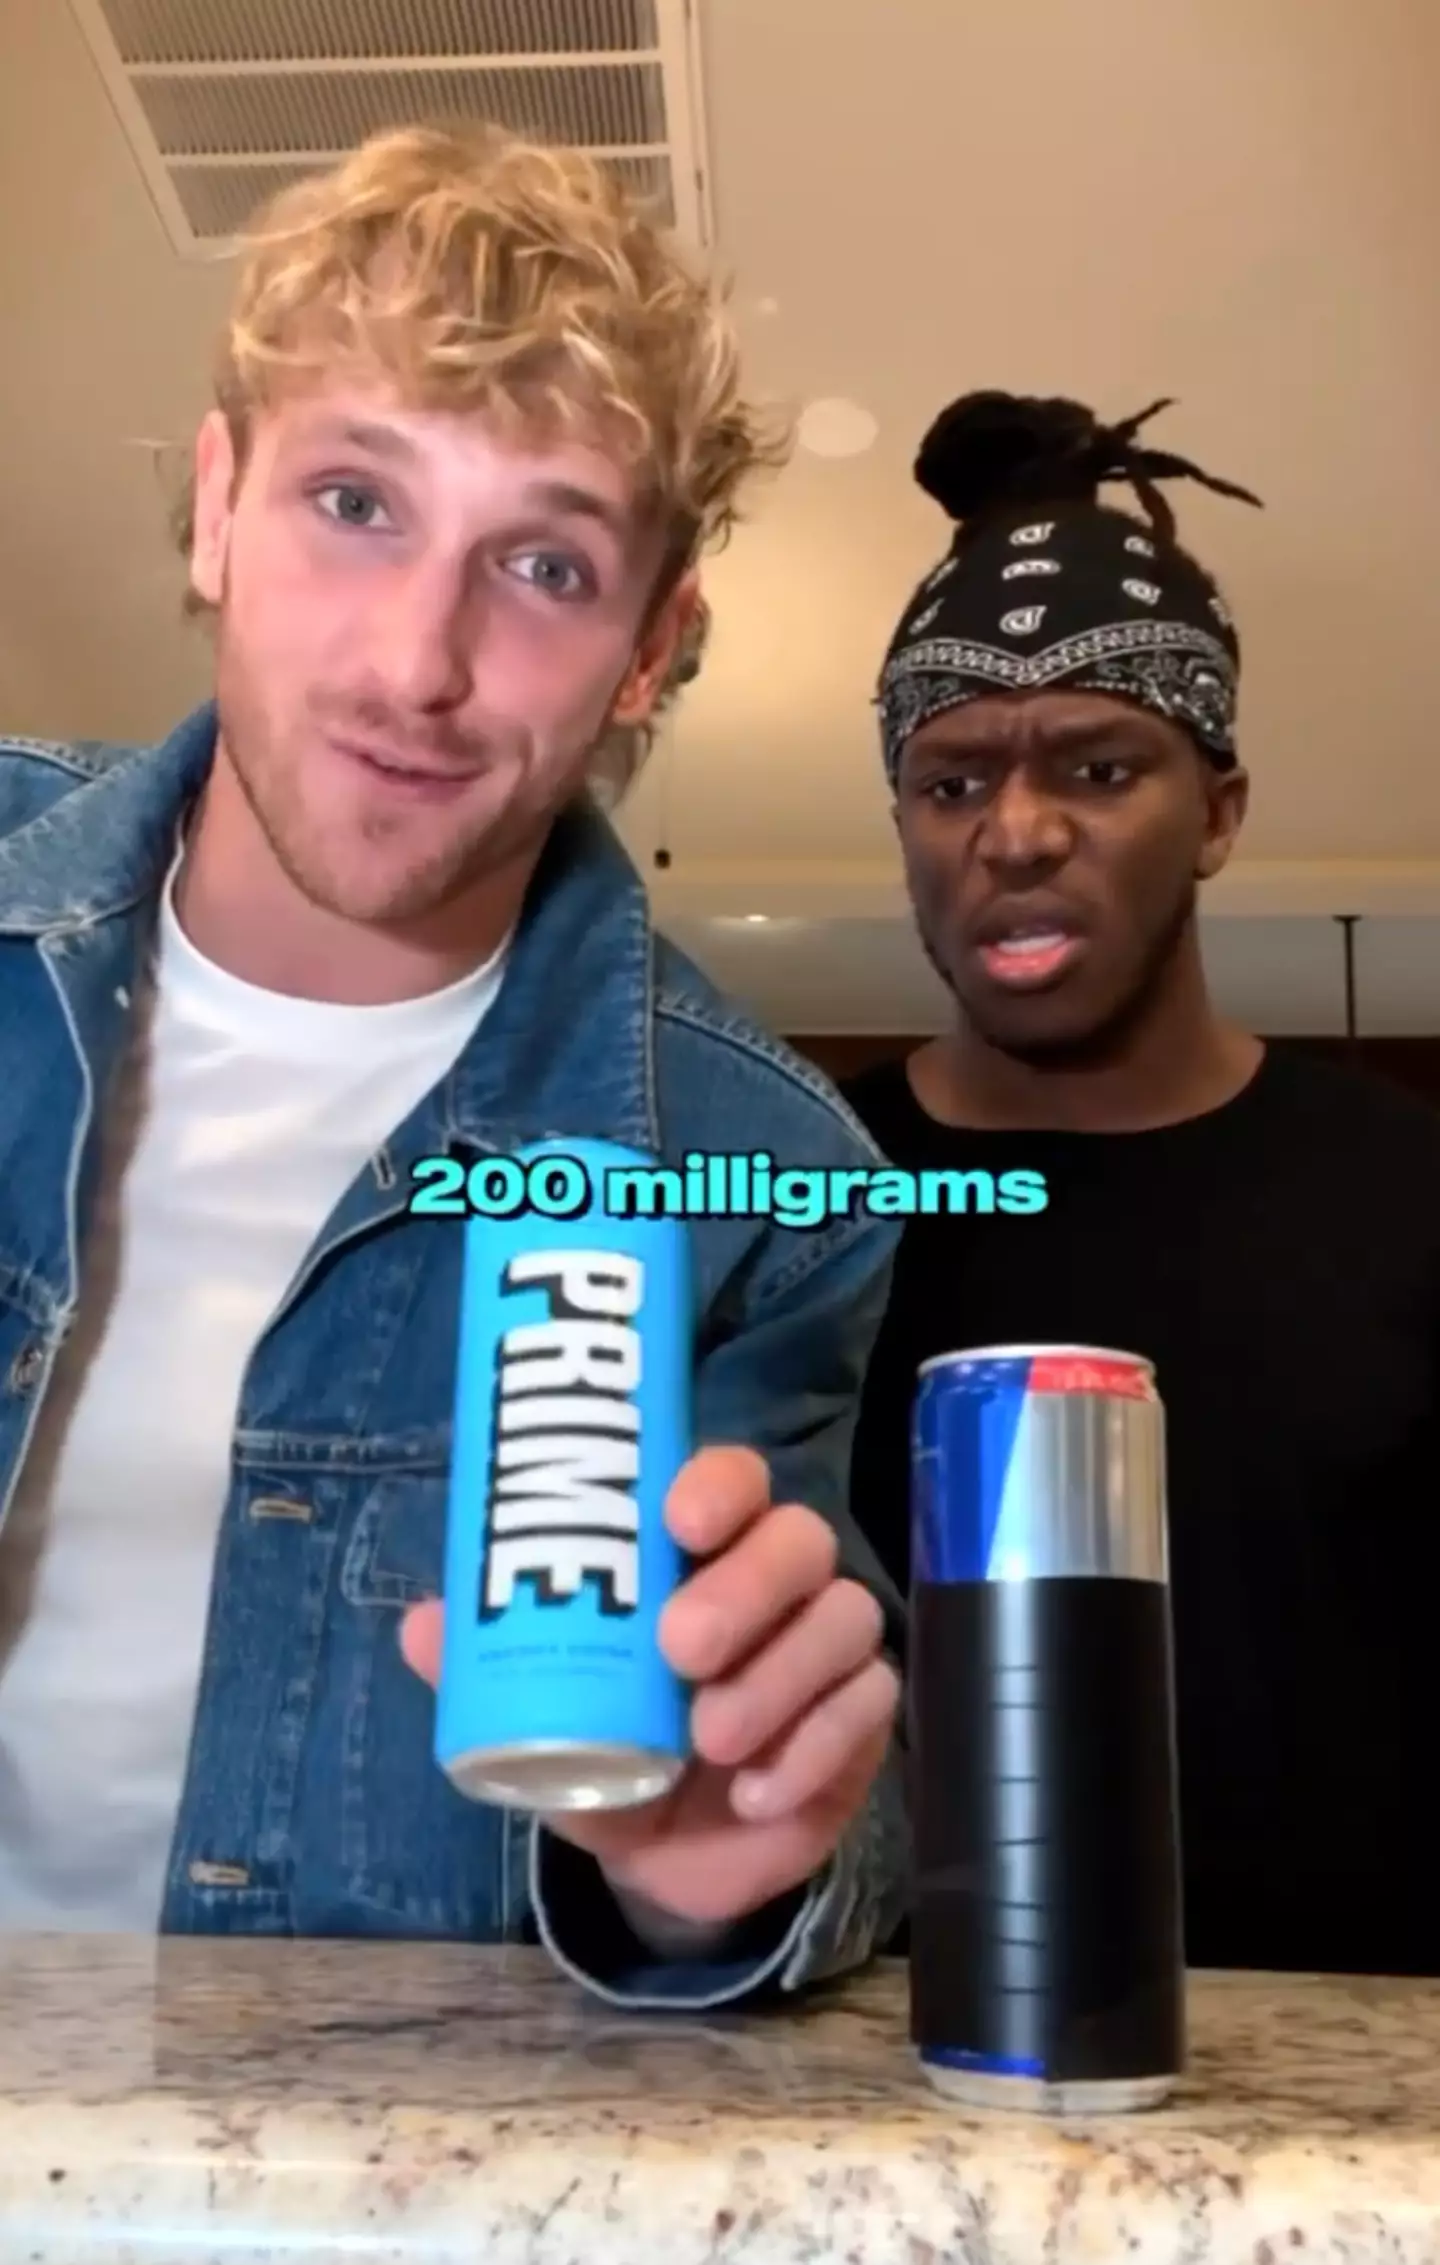 Logan Paul and KSI have promoted the caffeine levels in Prime.